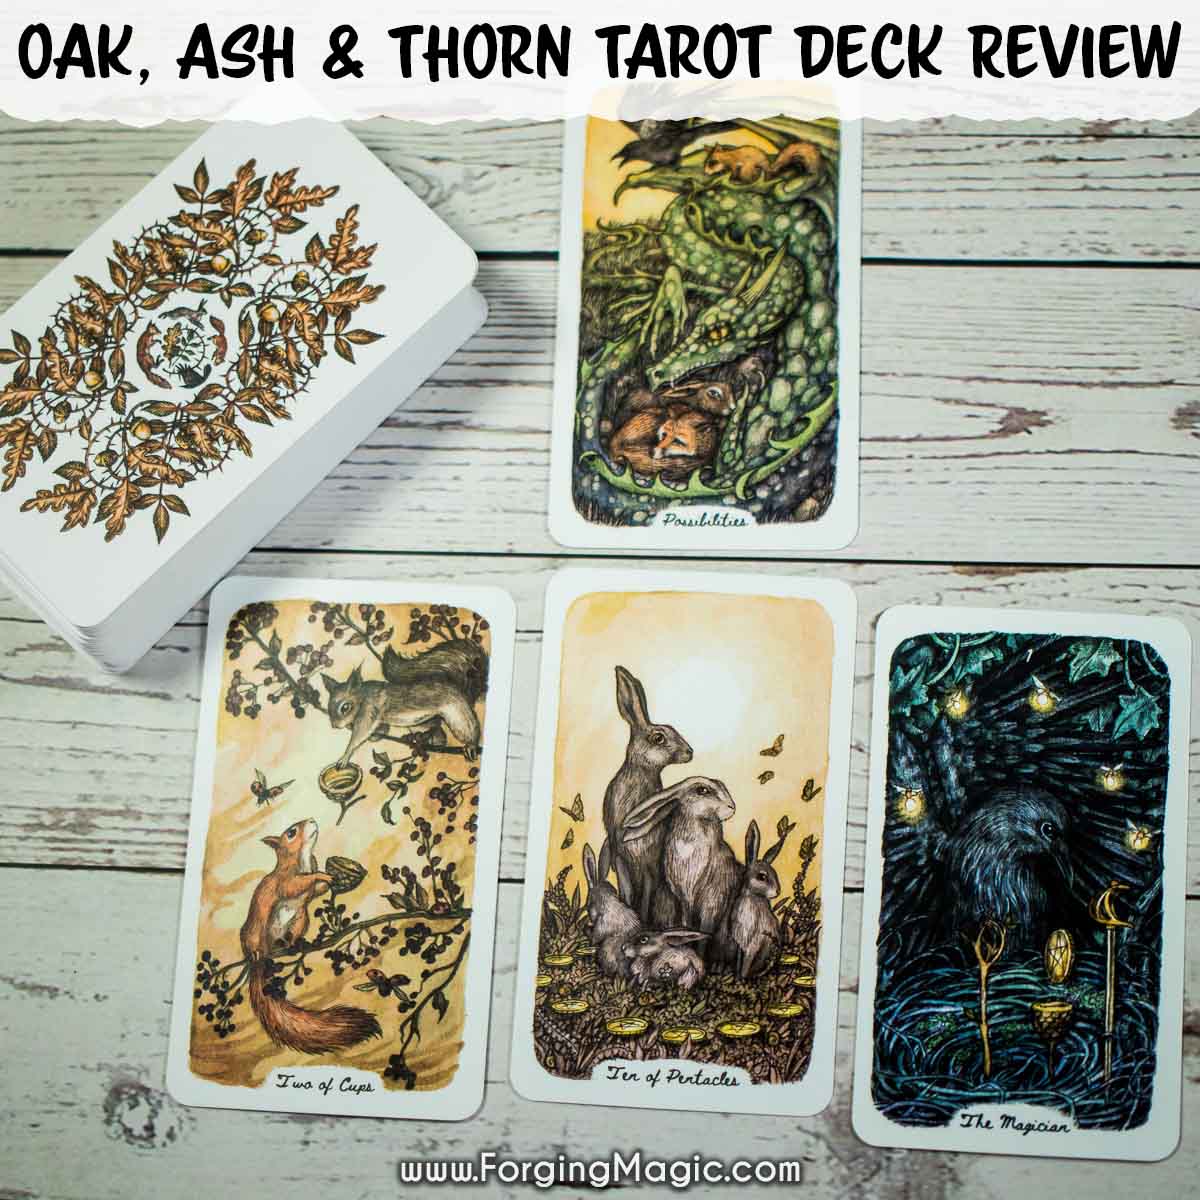 Oak Ash and Thorn Tarot Deck Review featuring back of the cards, Two of Cups card, Ten of Pentacles Card and the Magician Card.